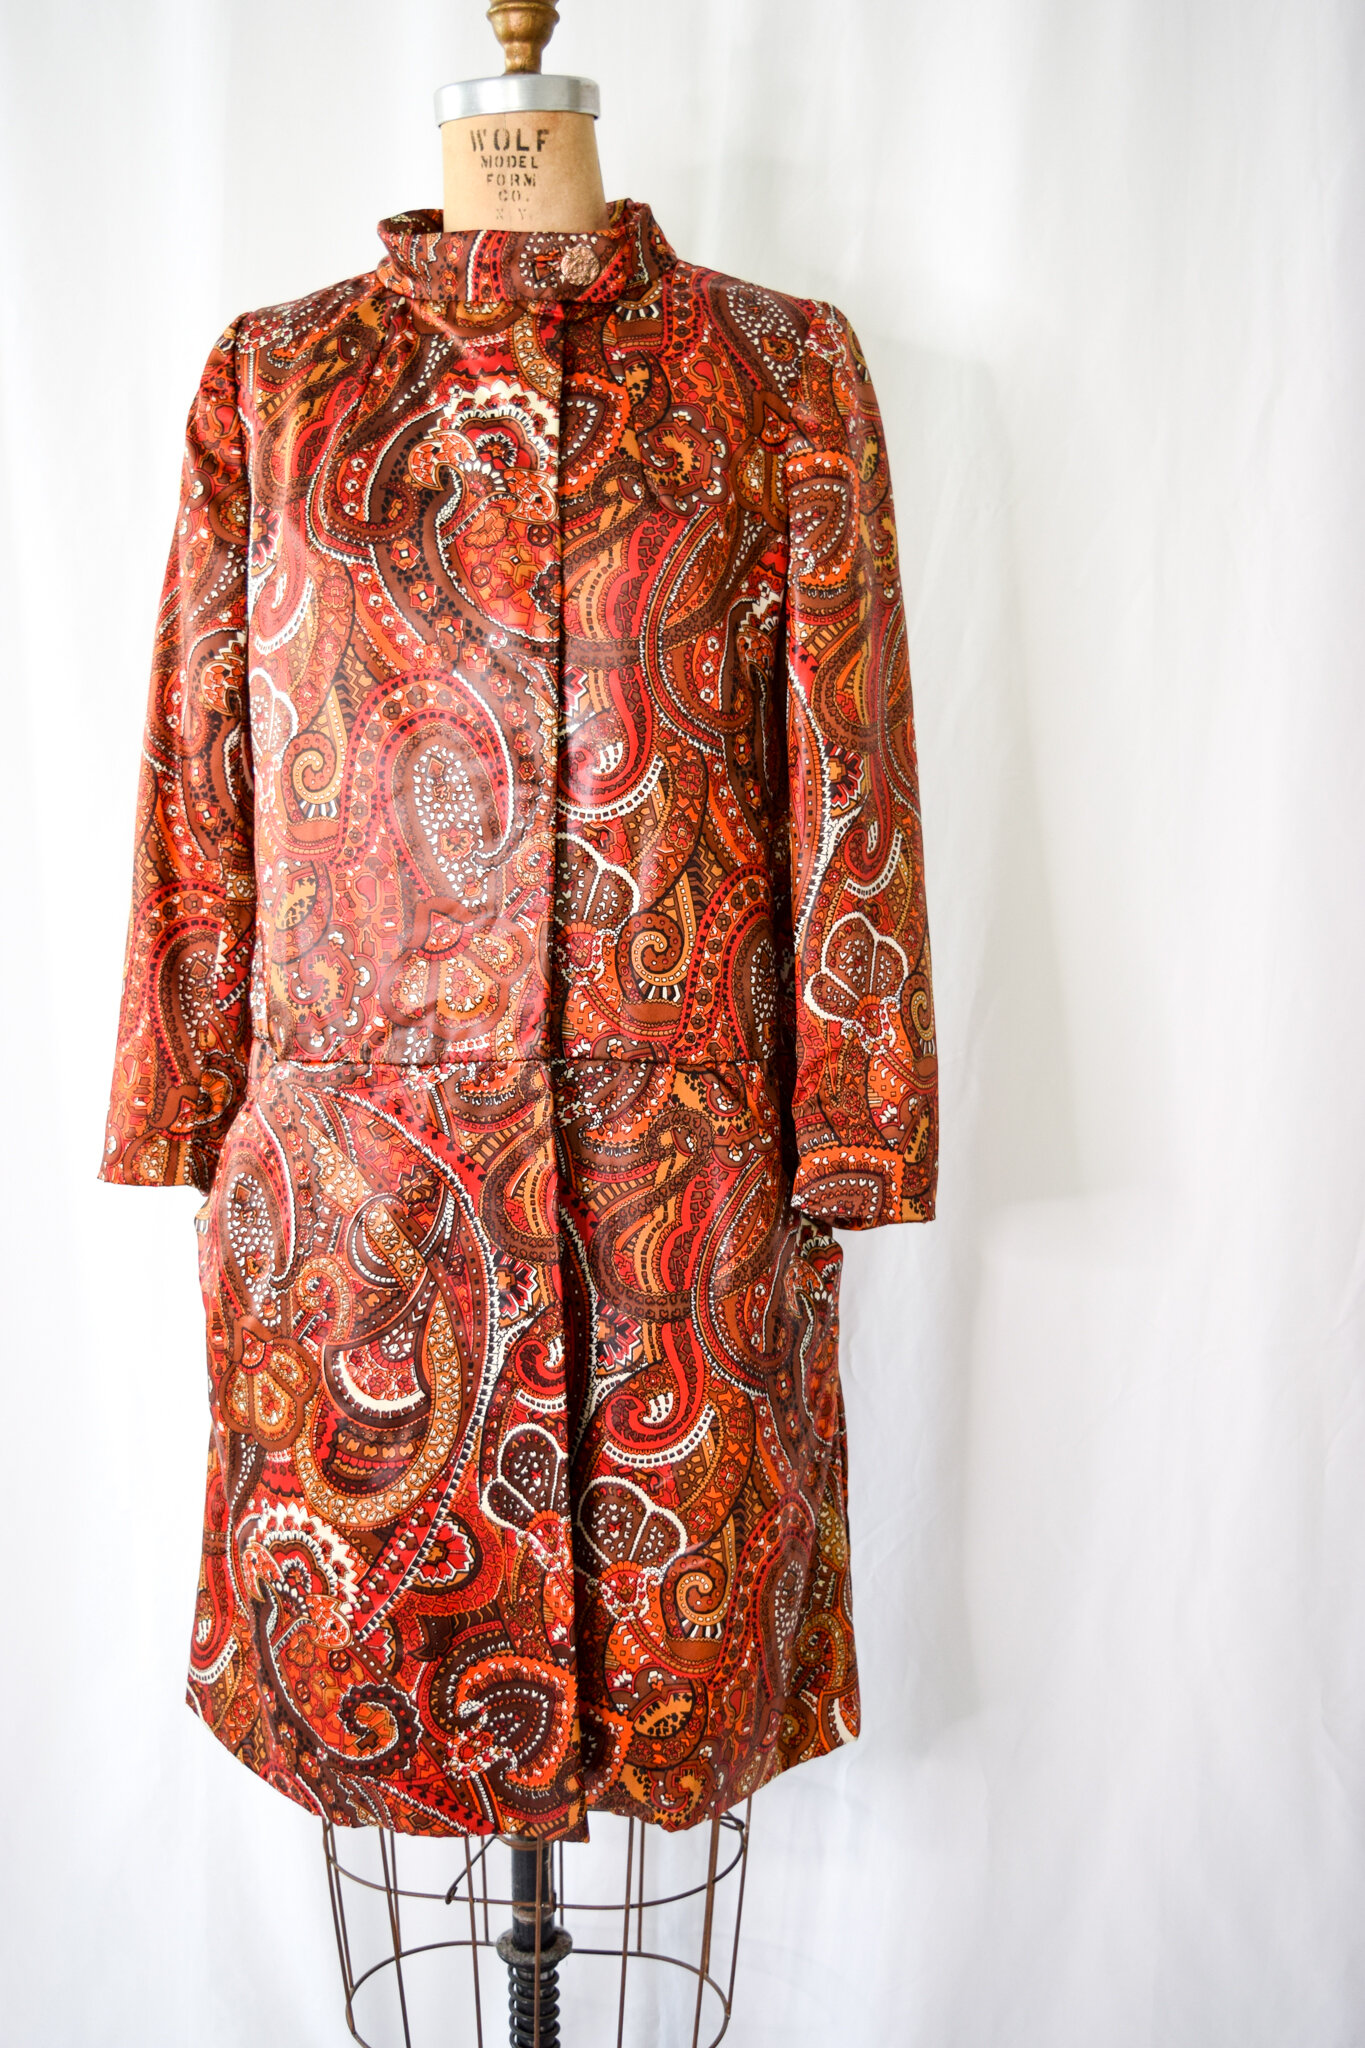 Bill Blass for Bond Street. Vintage 1960's Mod Psychedelic Paisley Cire ...